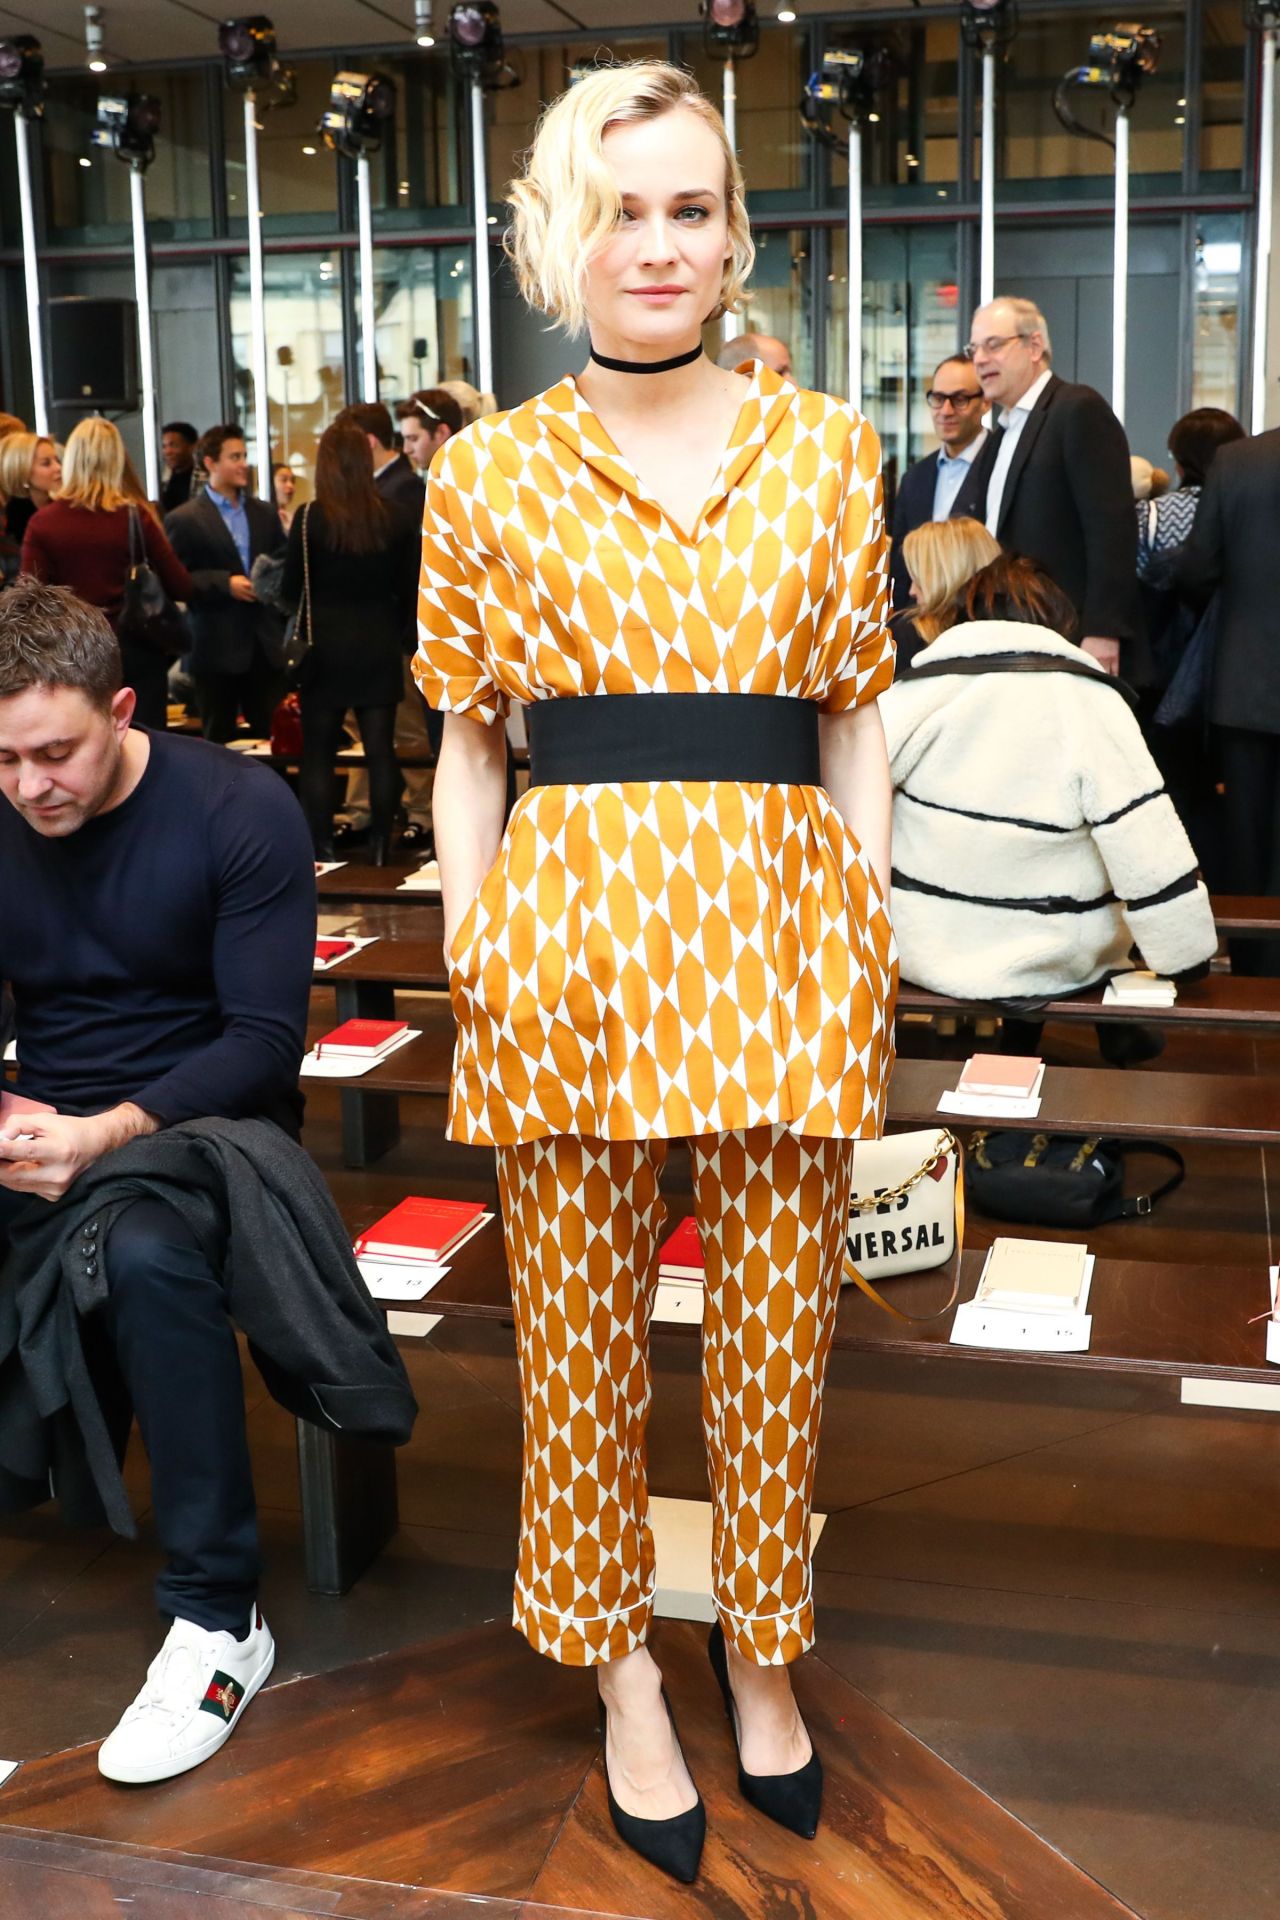 Diane Kruger at New York Fashion Week 12th February 2022 : r/CelebEvents